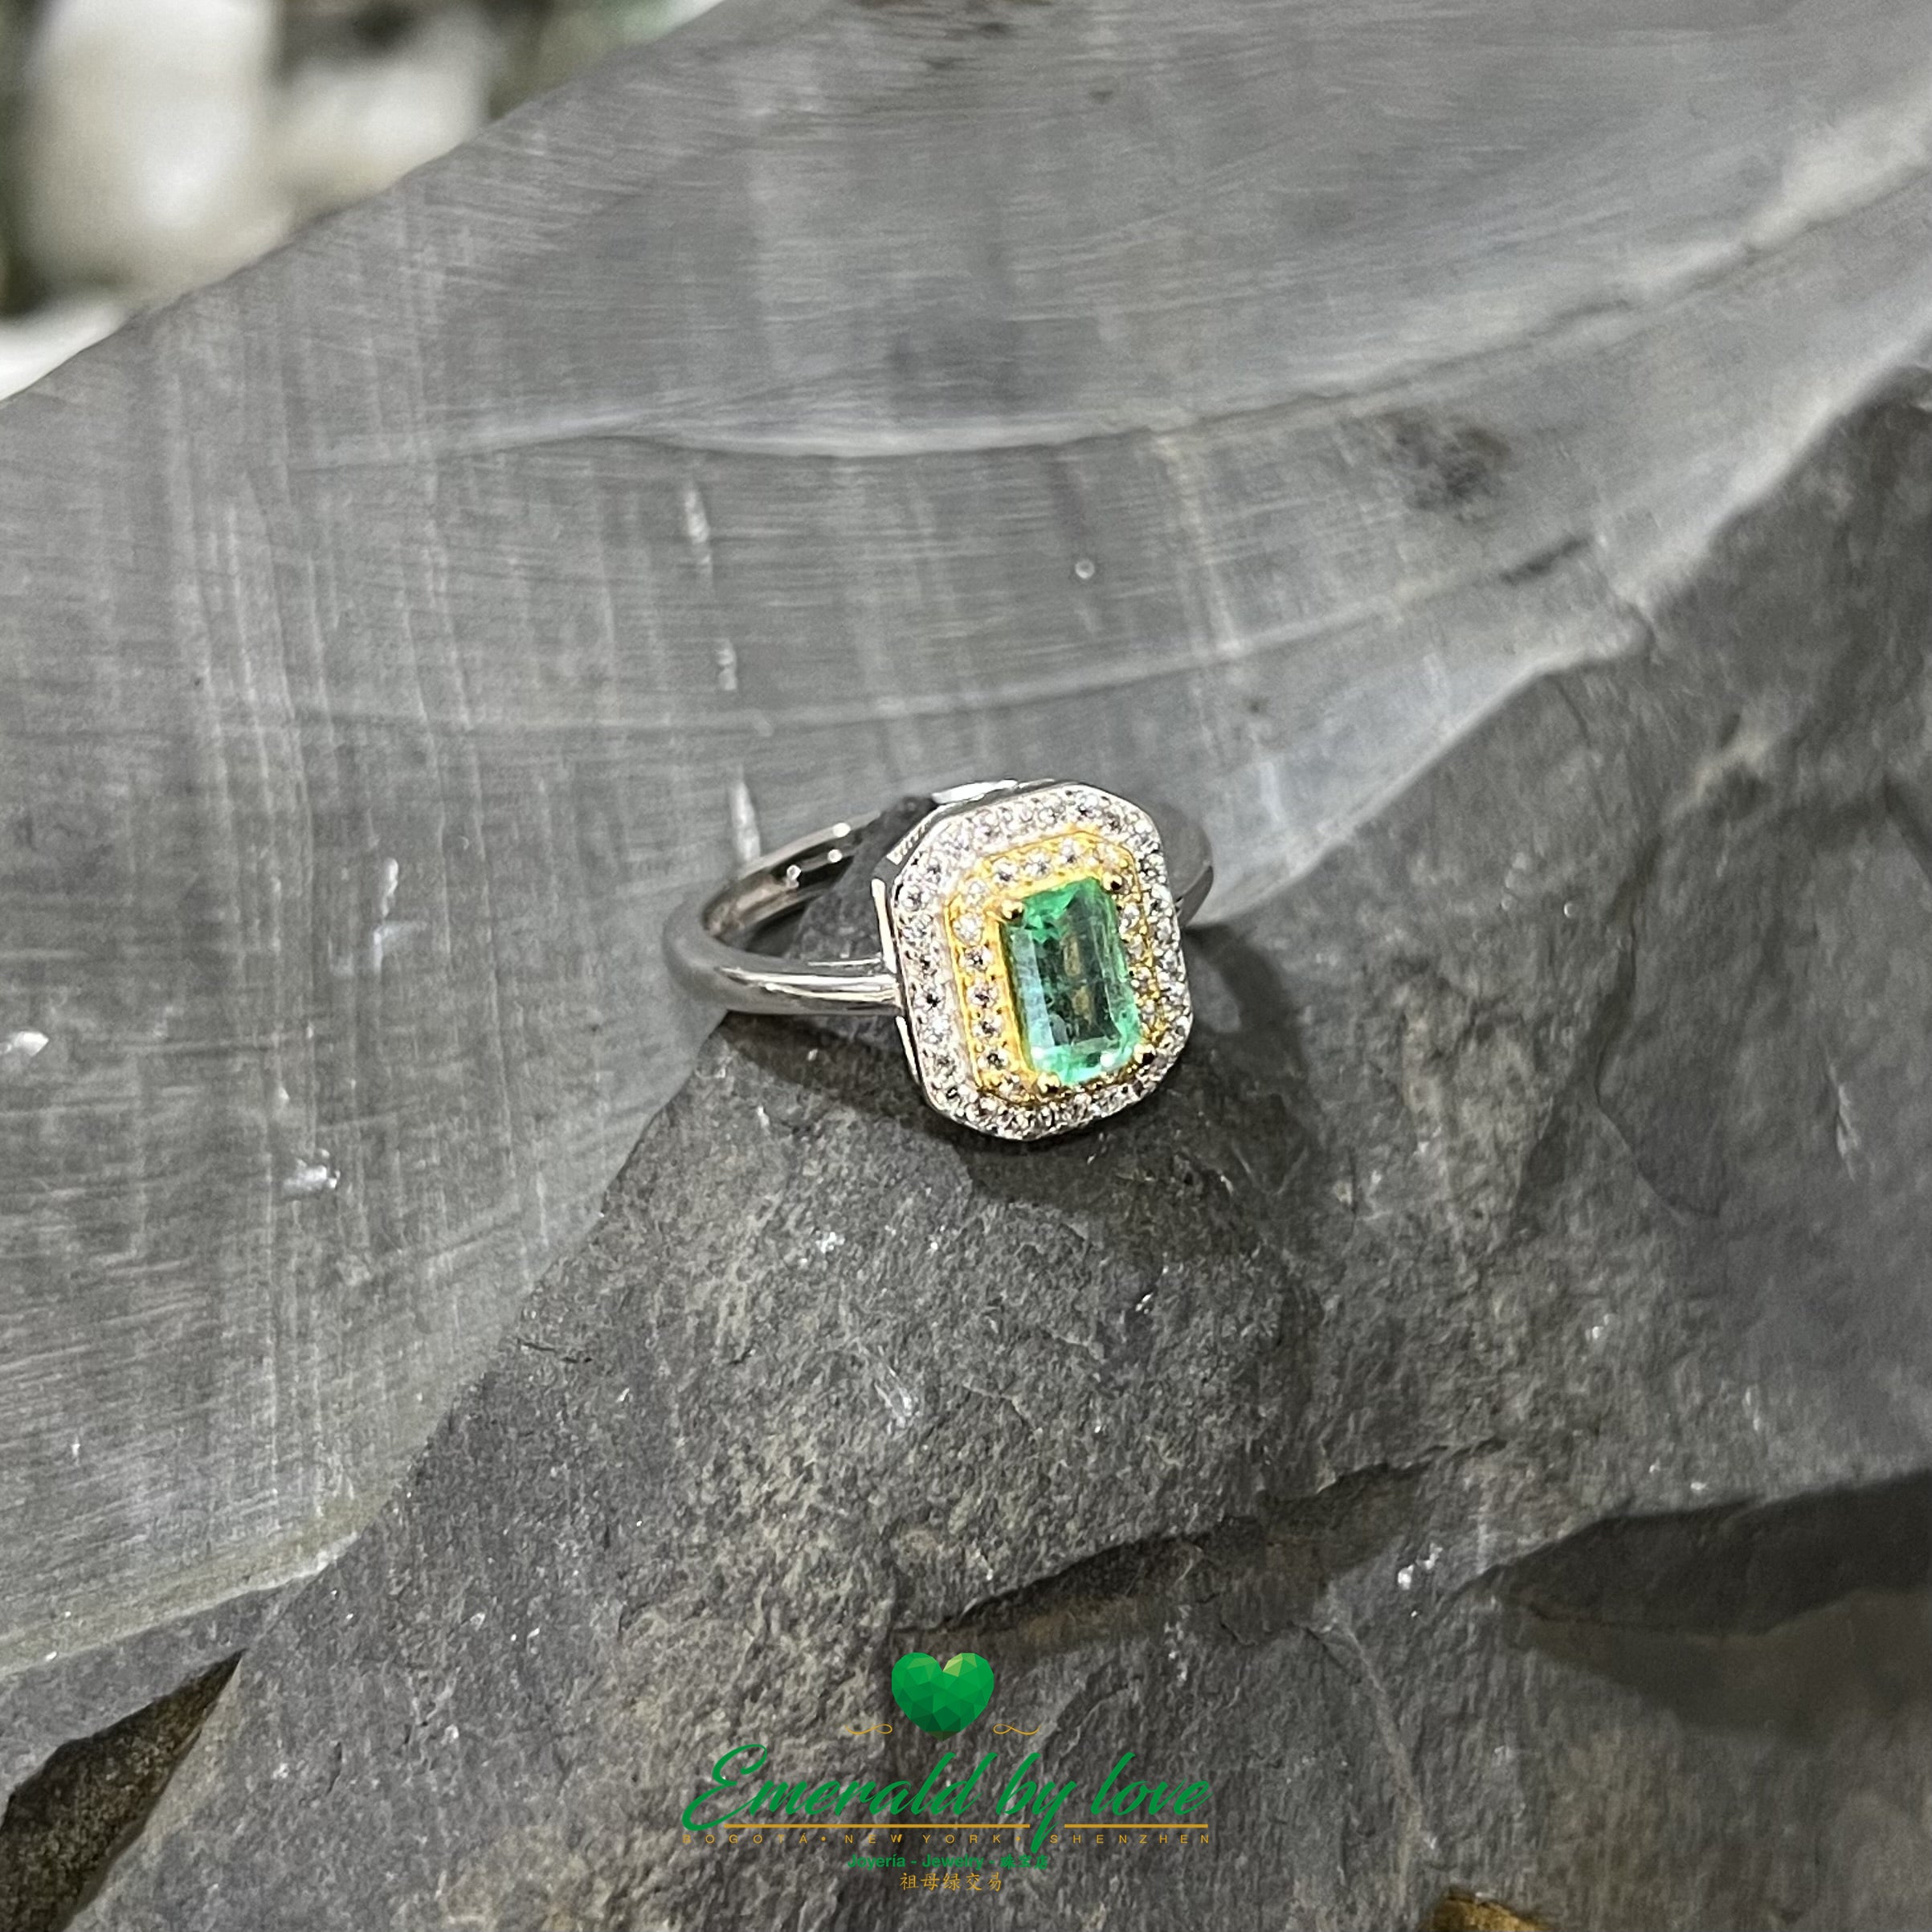 Rectangular Gold-Plated Ring with Central Emerald